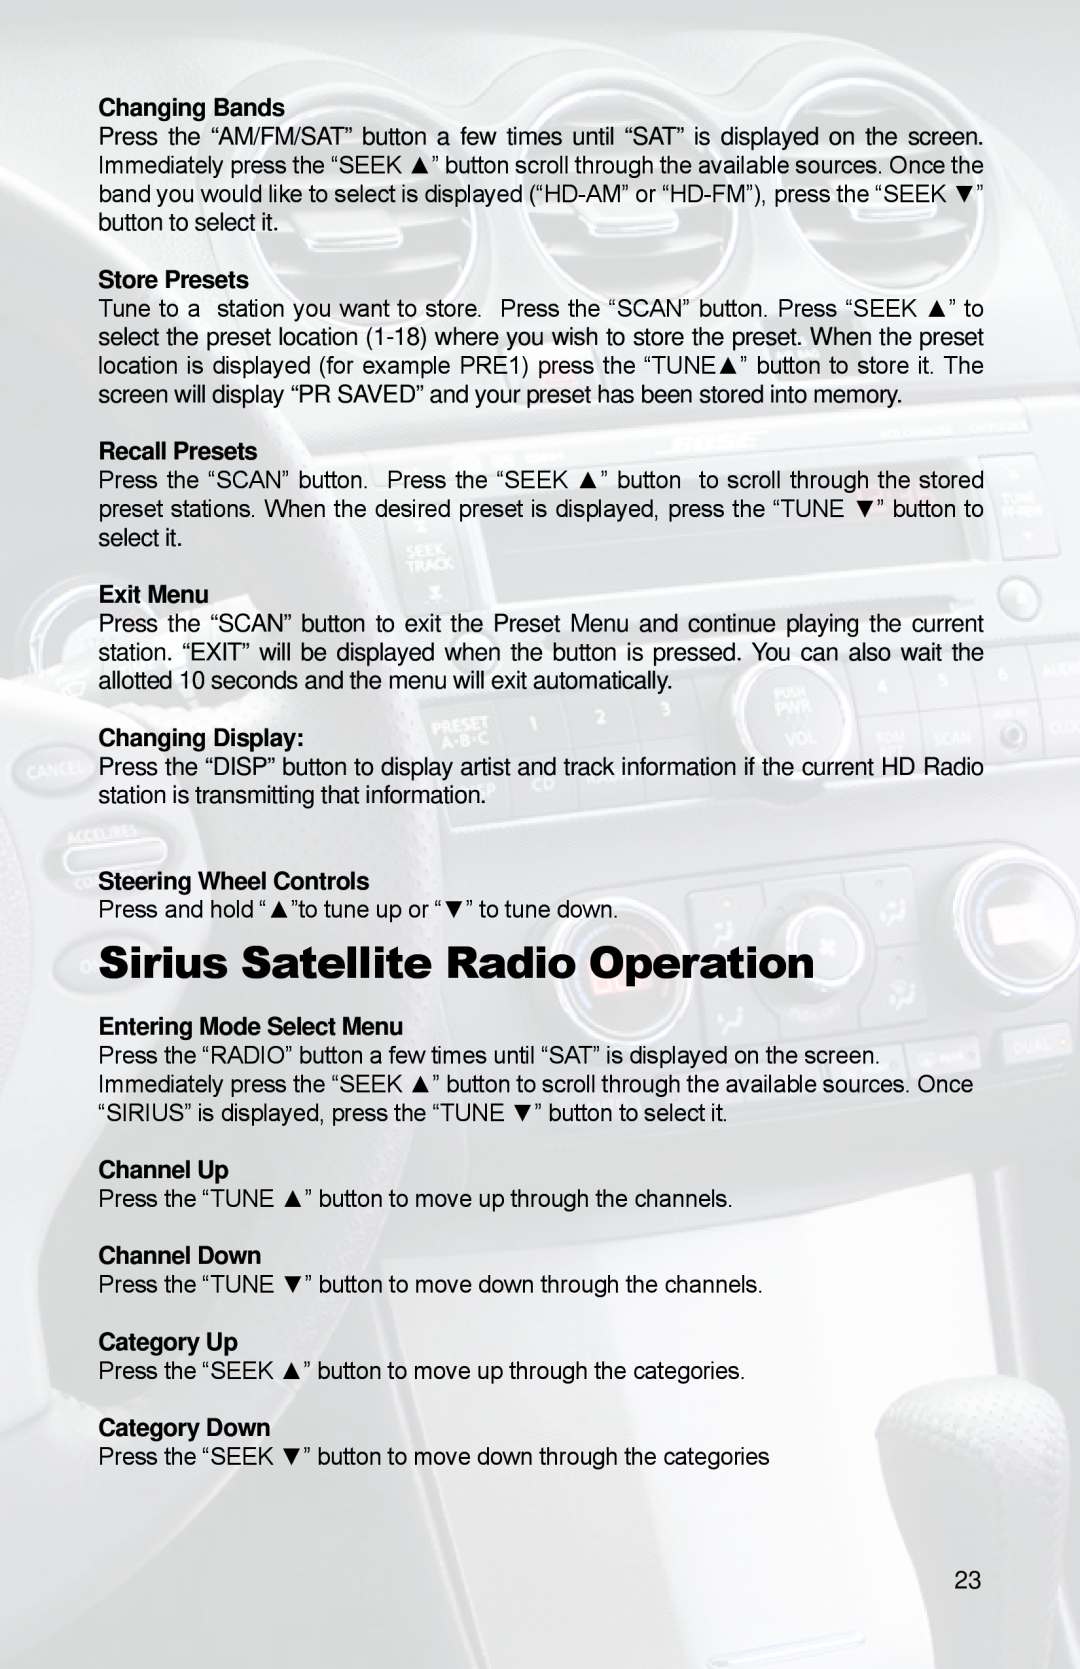 iSimple PGHNI2 owner manual Sirius Satellite Radio Operation, Press and hold “”to tune up or “” to tune down 